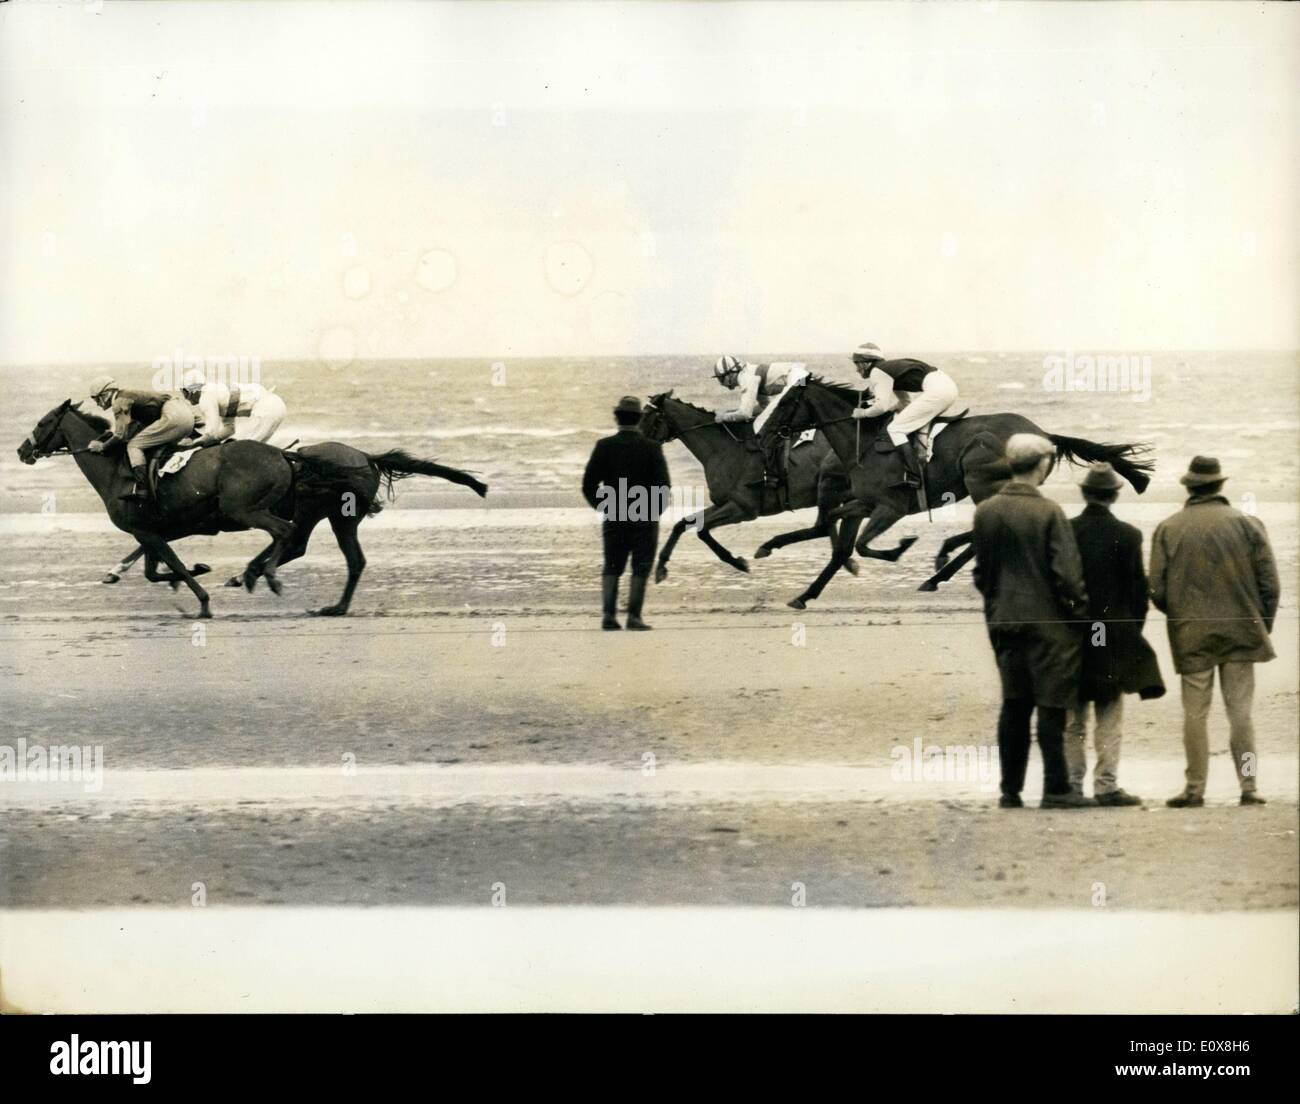 Aug. 08, 1965 - The Tide Is Out - And The Laytown Race Are On: Two hours before the off, the racecourse was 6ft. under the Irish Sea. But the tide soon went down - and the Horse lined up to start the Laytown Races on the beach. The Laytown races, run under arctic racing rules have been held annually for as long as any one can remember. There's nothing quite like it in Ireland or anywhere also in the world. For any ordinary Clark of the Course the Whole thing would be nerve racing Stock Photo